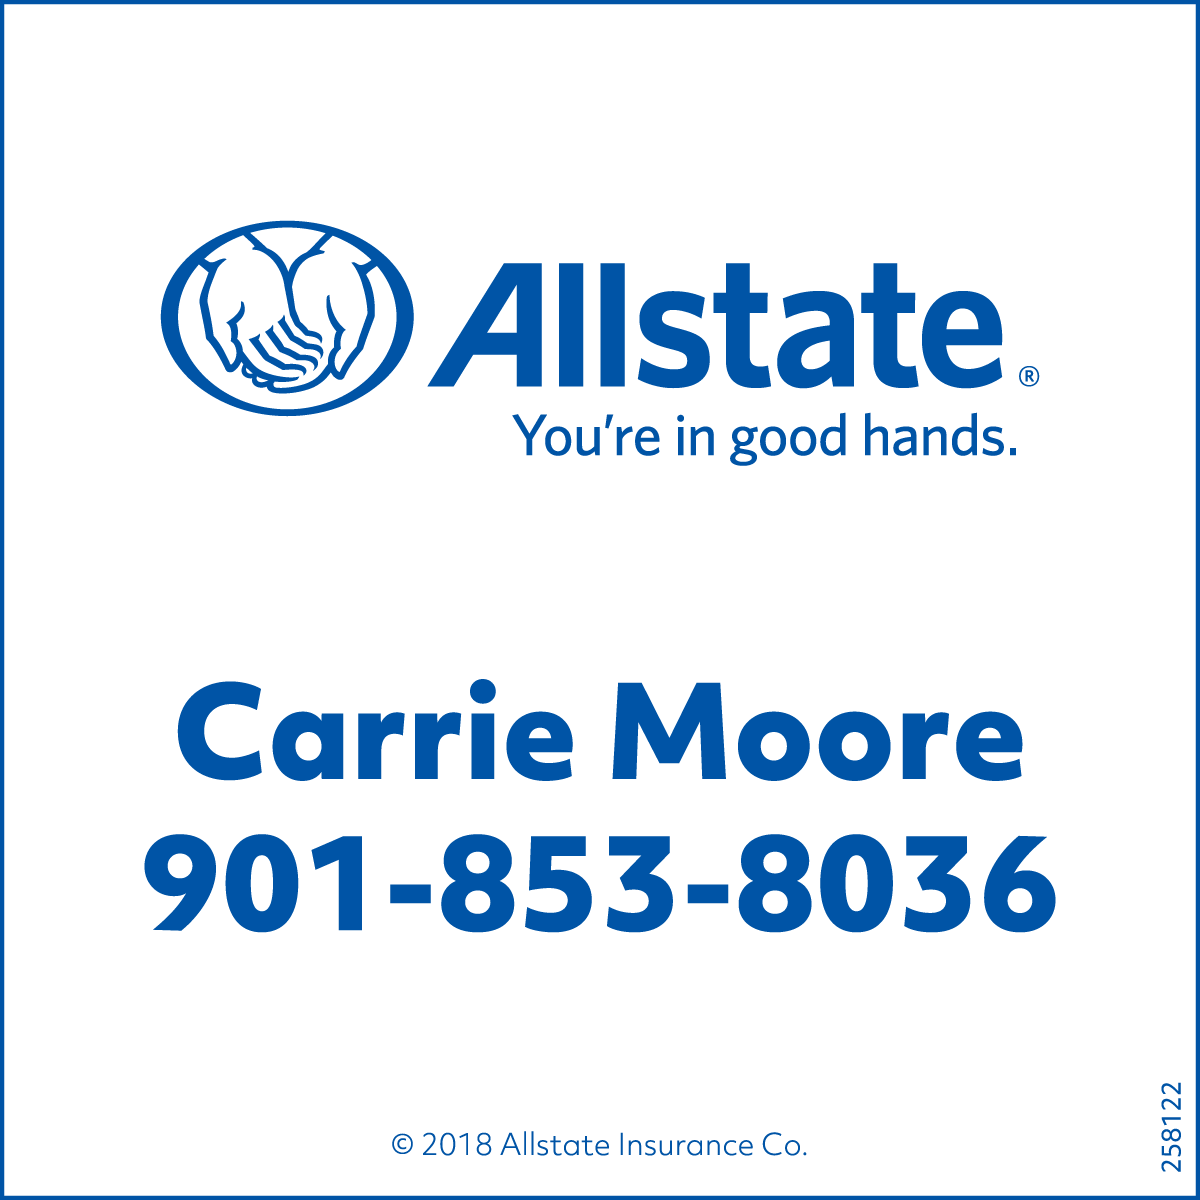 Allstate Carrie Moore